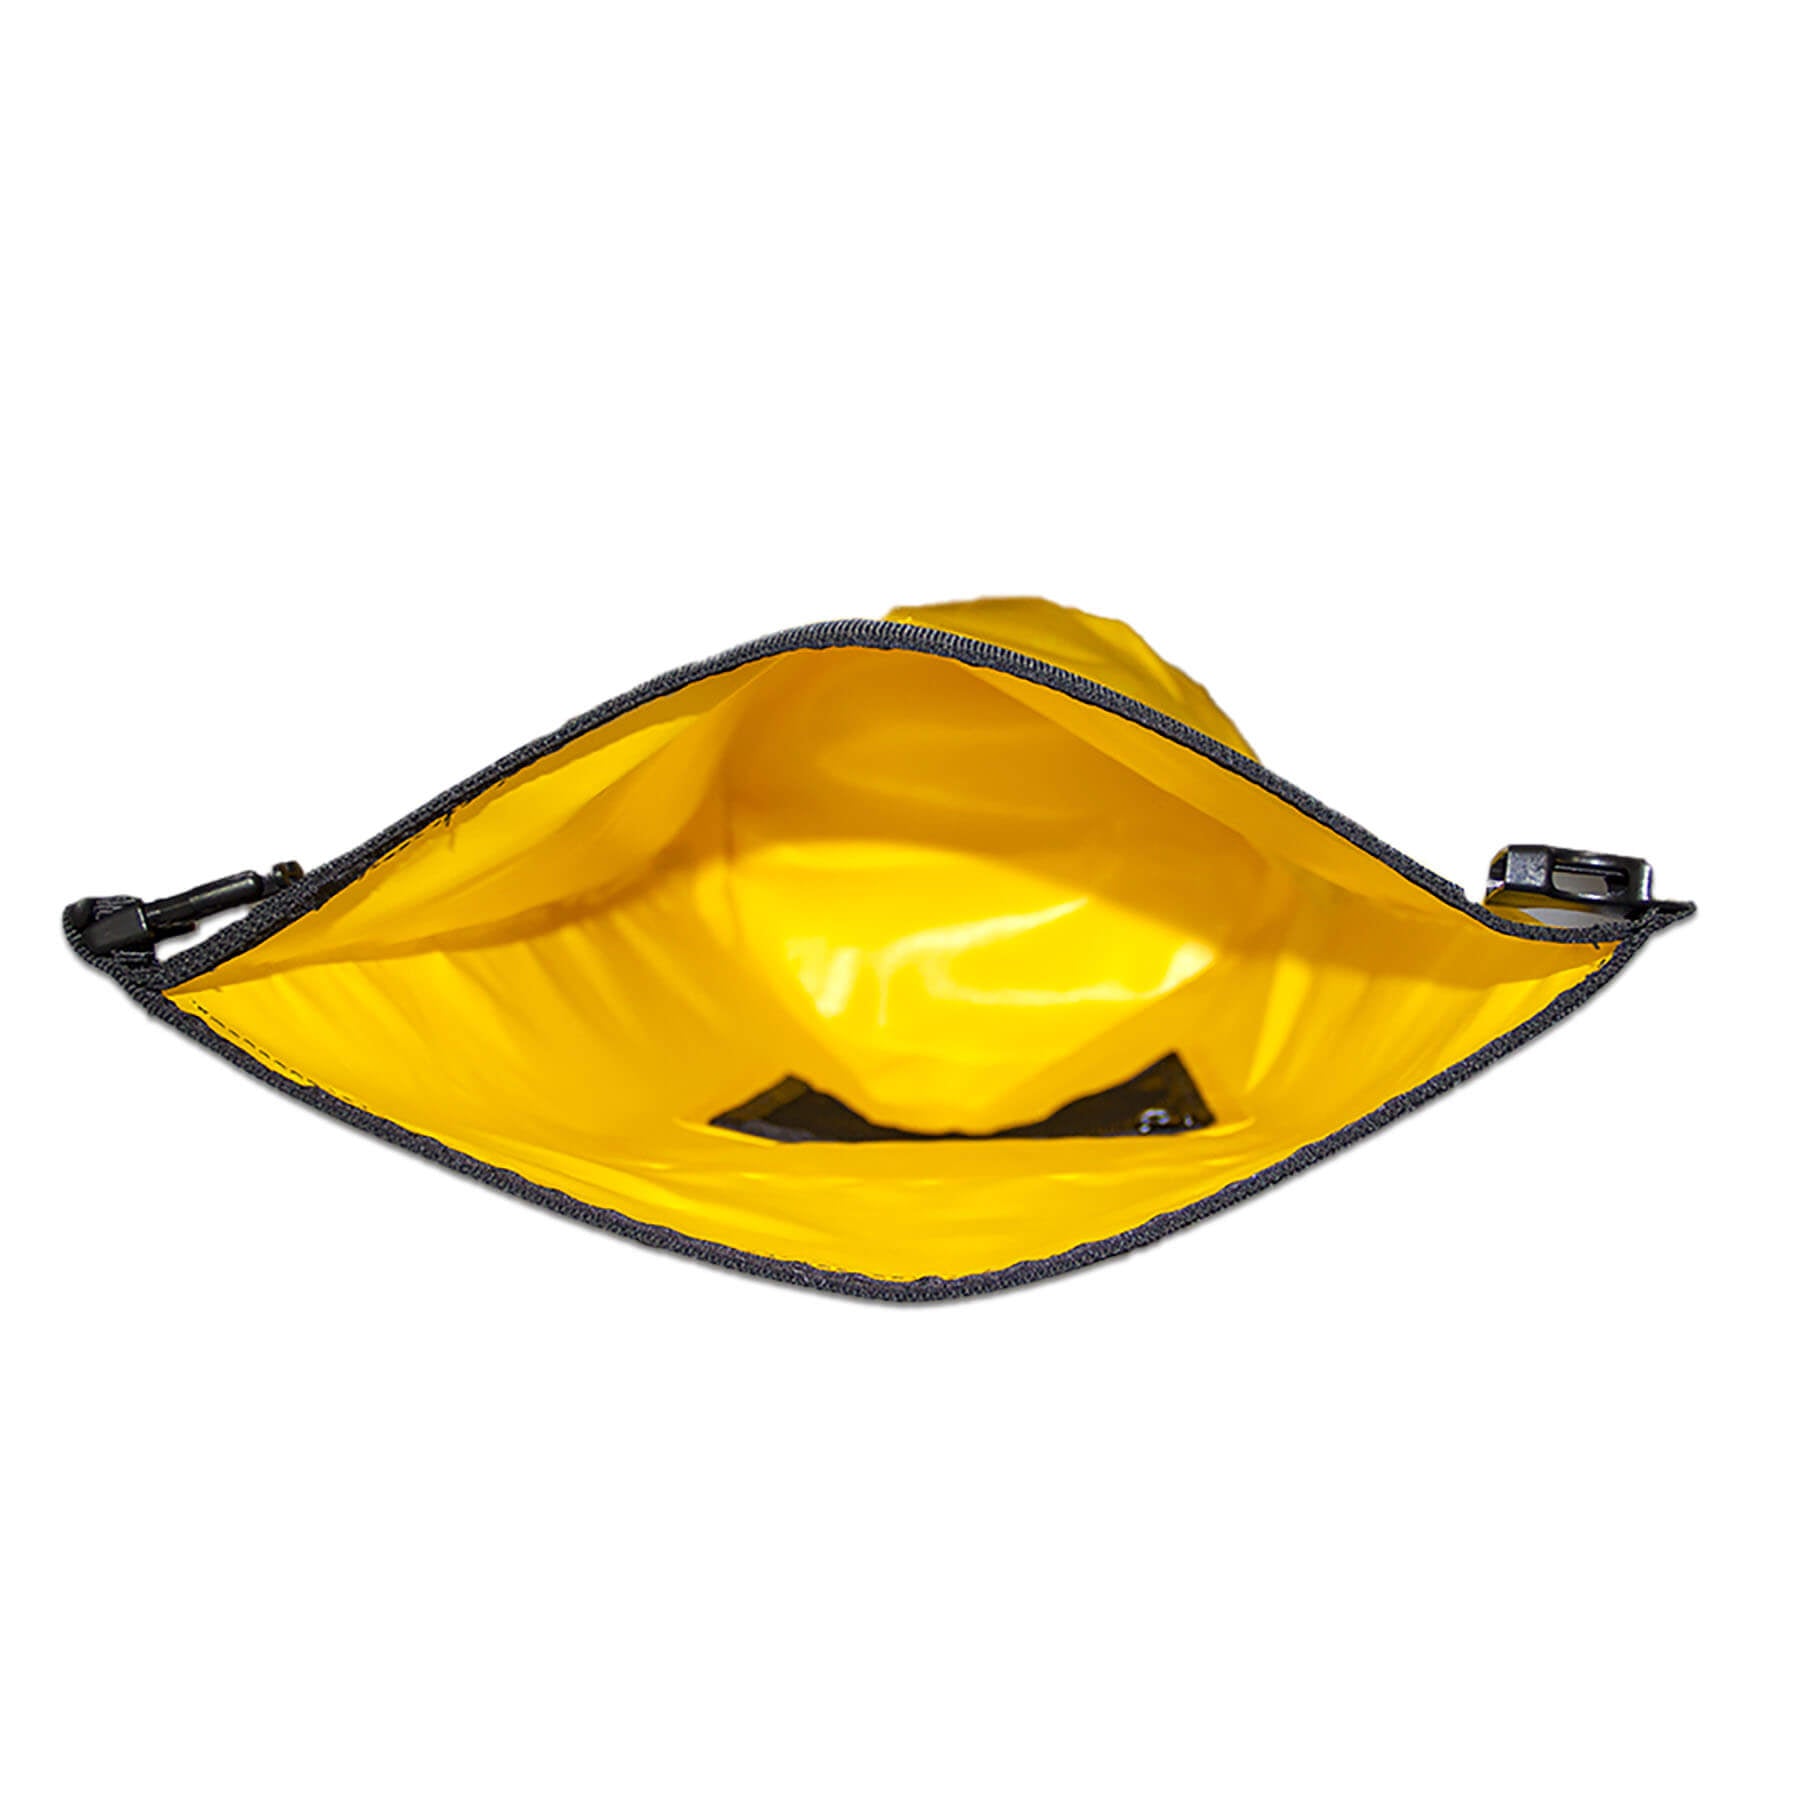 waterproof dry bag 20 litres with detachable comfort straps, D rings and handle in yellow with lemon print design inside view